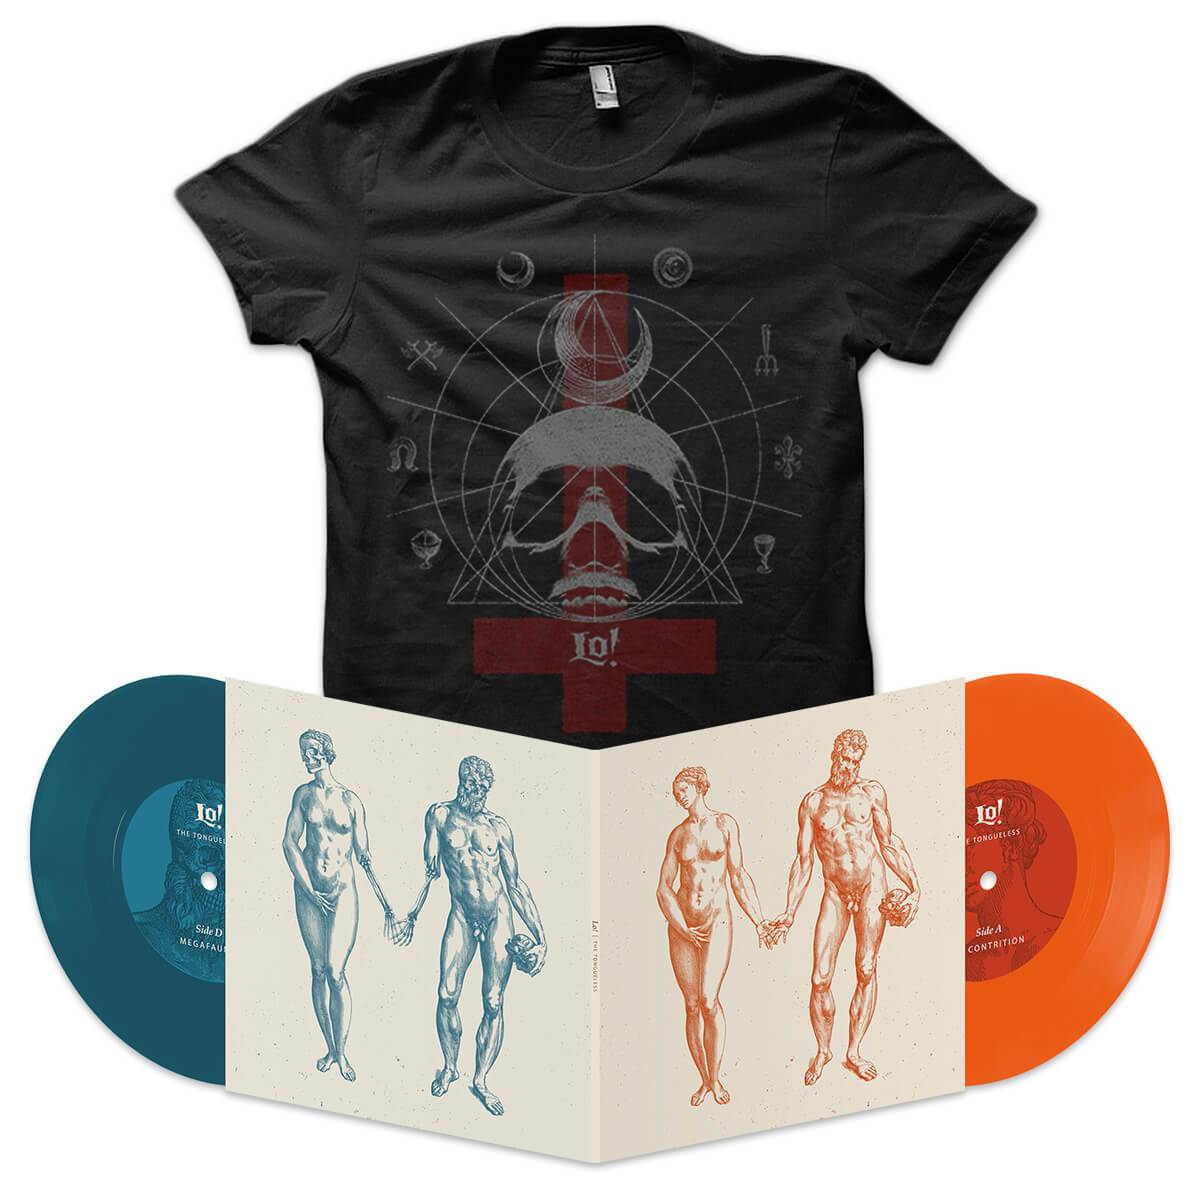 Lo! - The Tongueless EP + T-Shirt